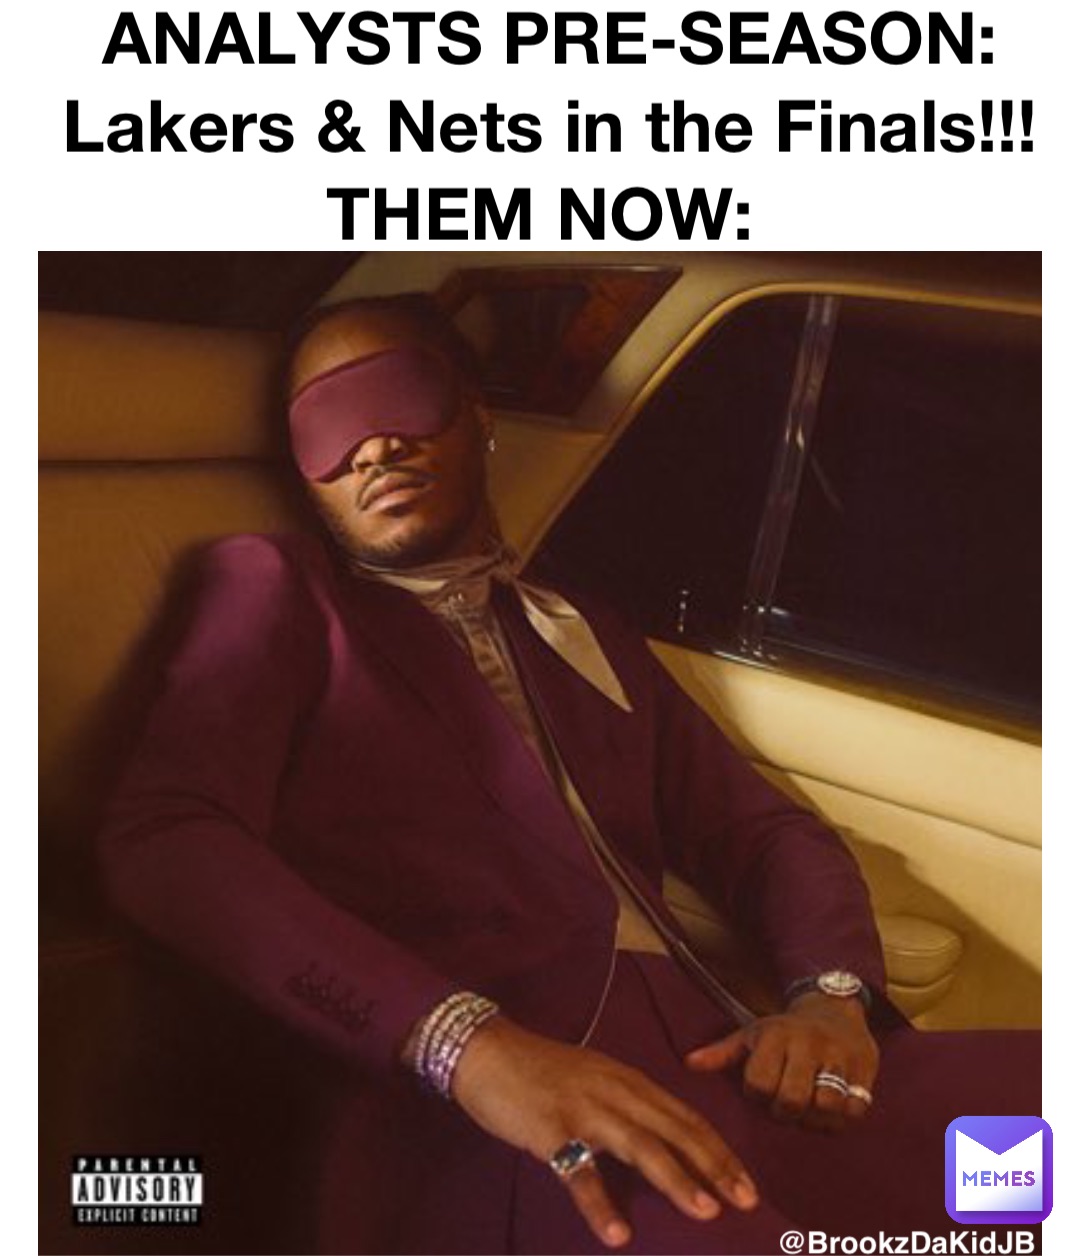 ANALYSTS PRE-SEASON: 
Lakers & Nets in the Finals!!! 
THEM NOW: @BrookzDaKidJB